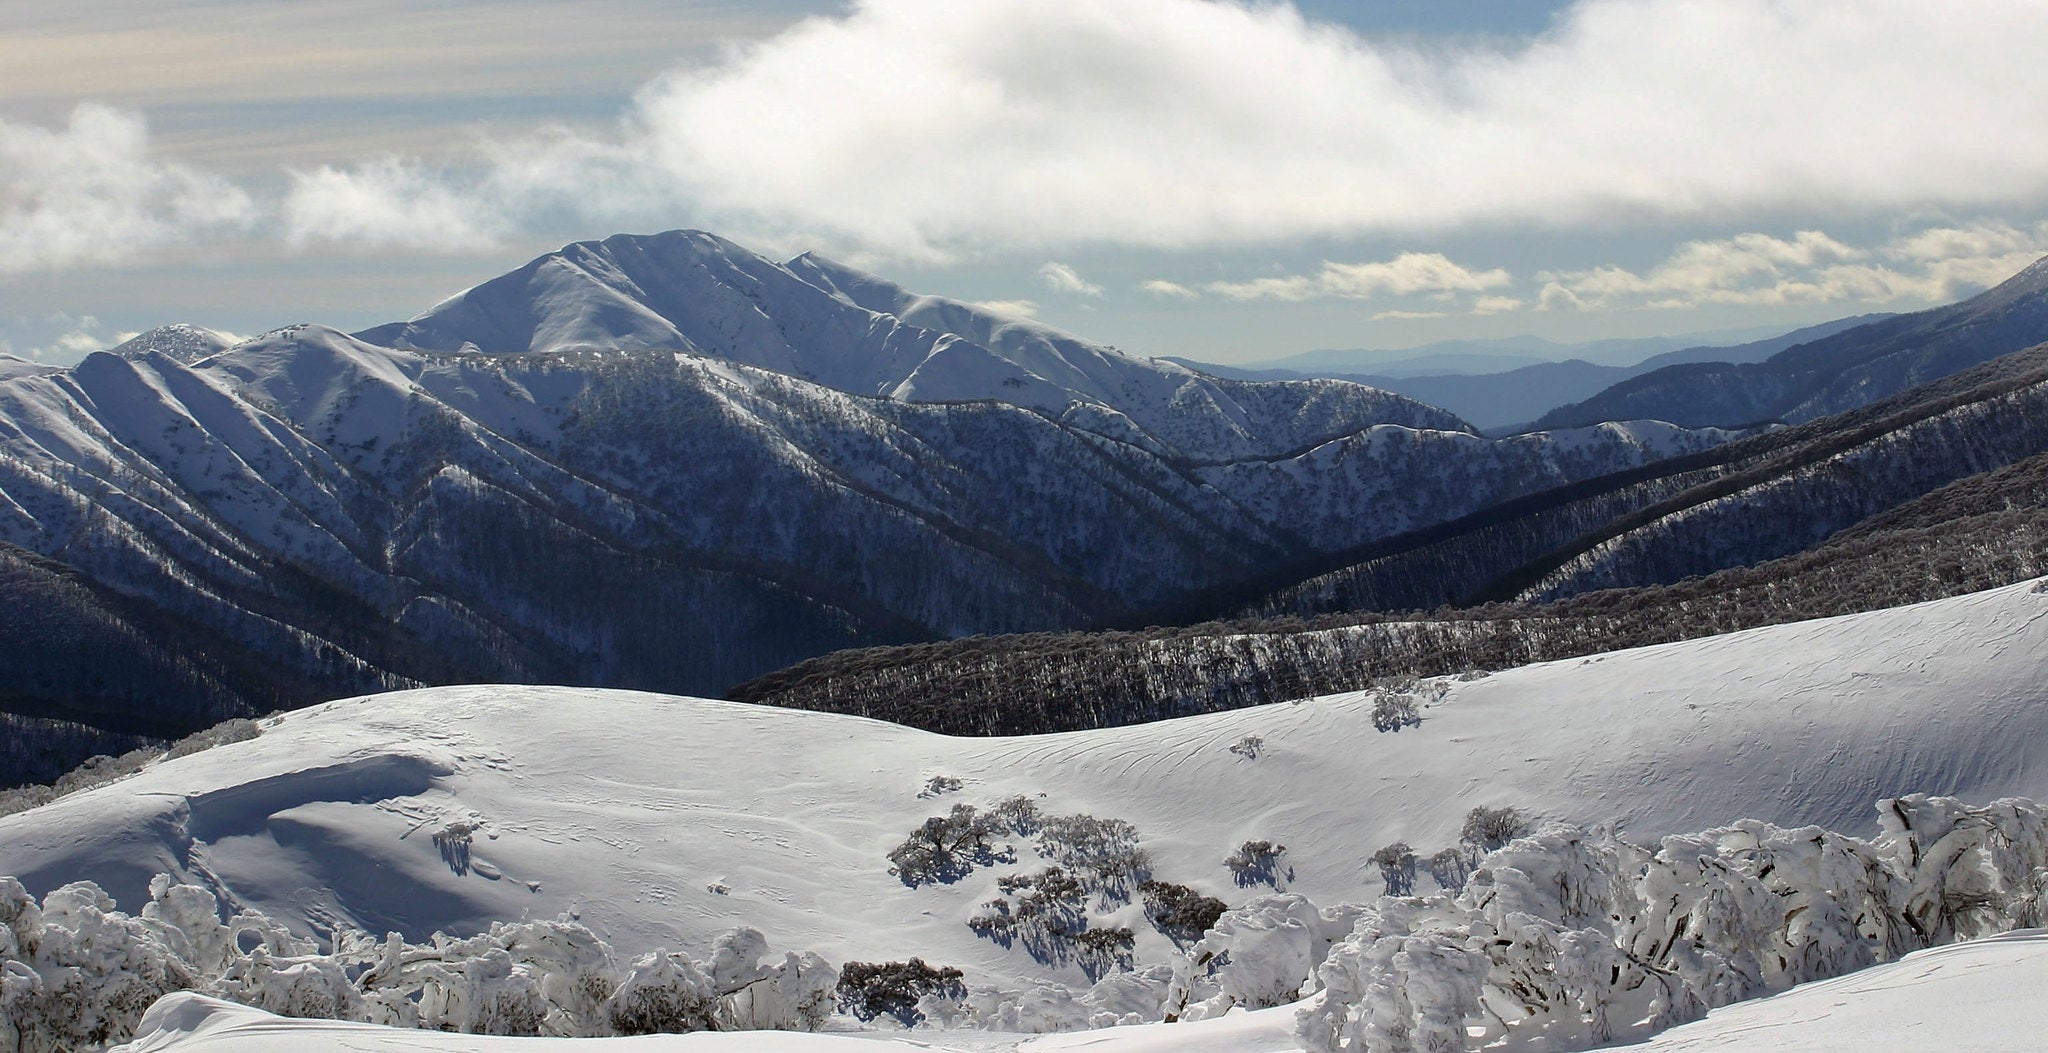 Mount Feathertop in the Victorian Alps, Australia covered in snow